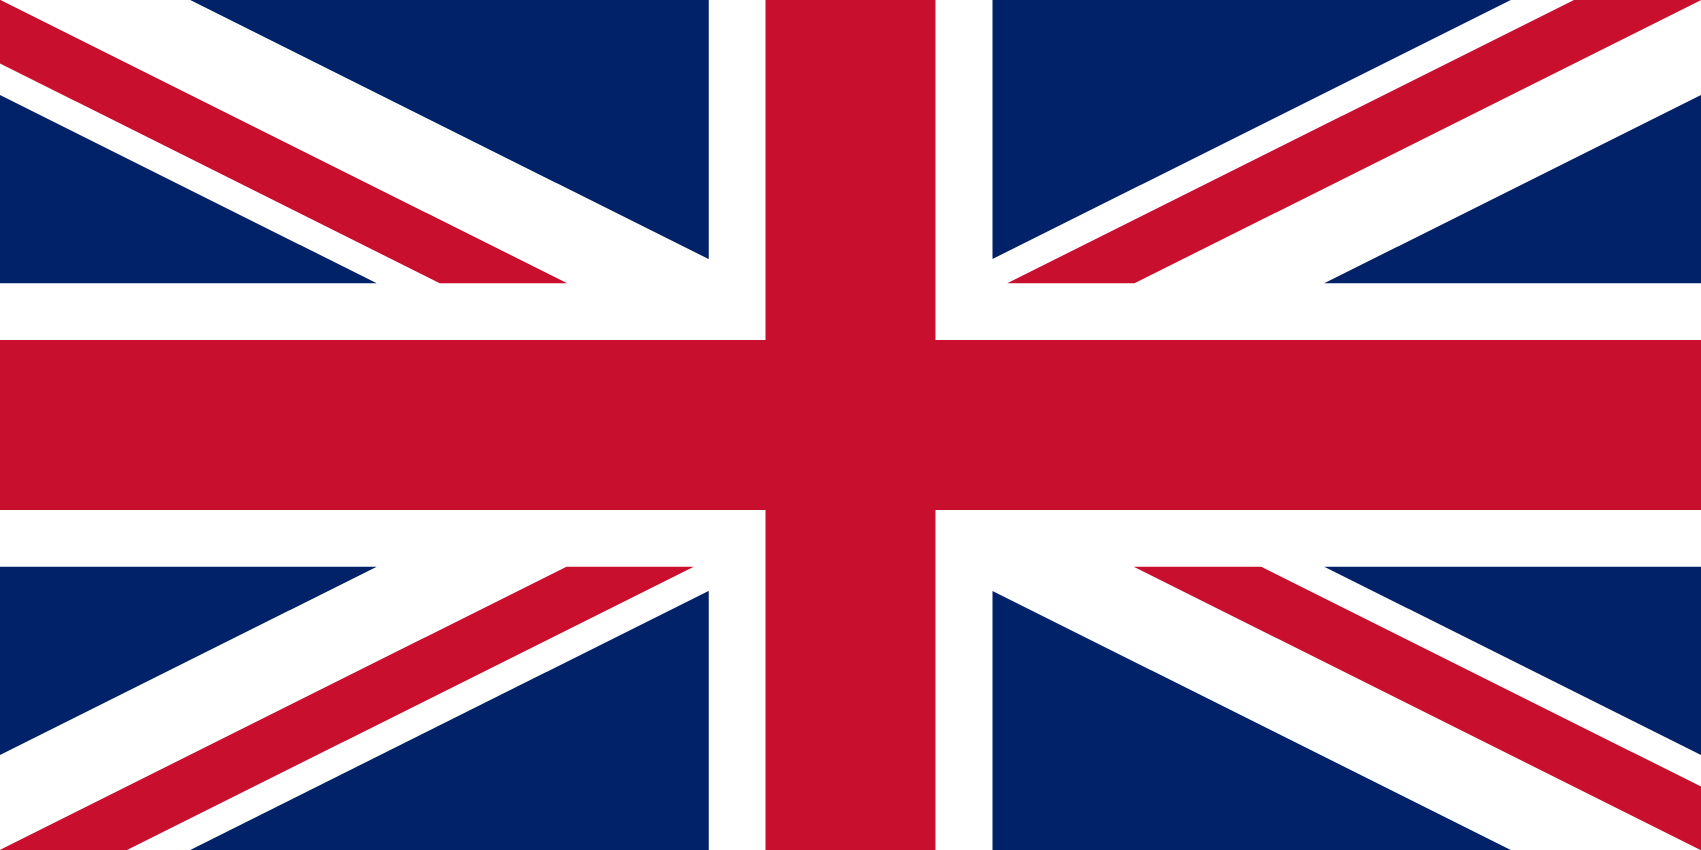 https://www.malloryint.net/images/mallory/Flag_of_the_United_Kingdom.png